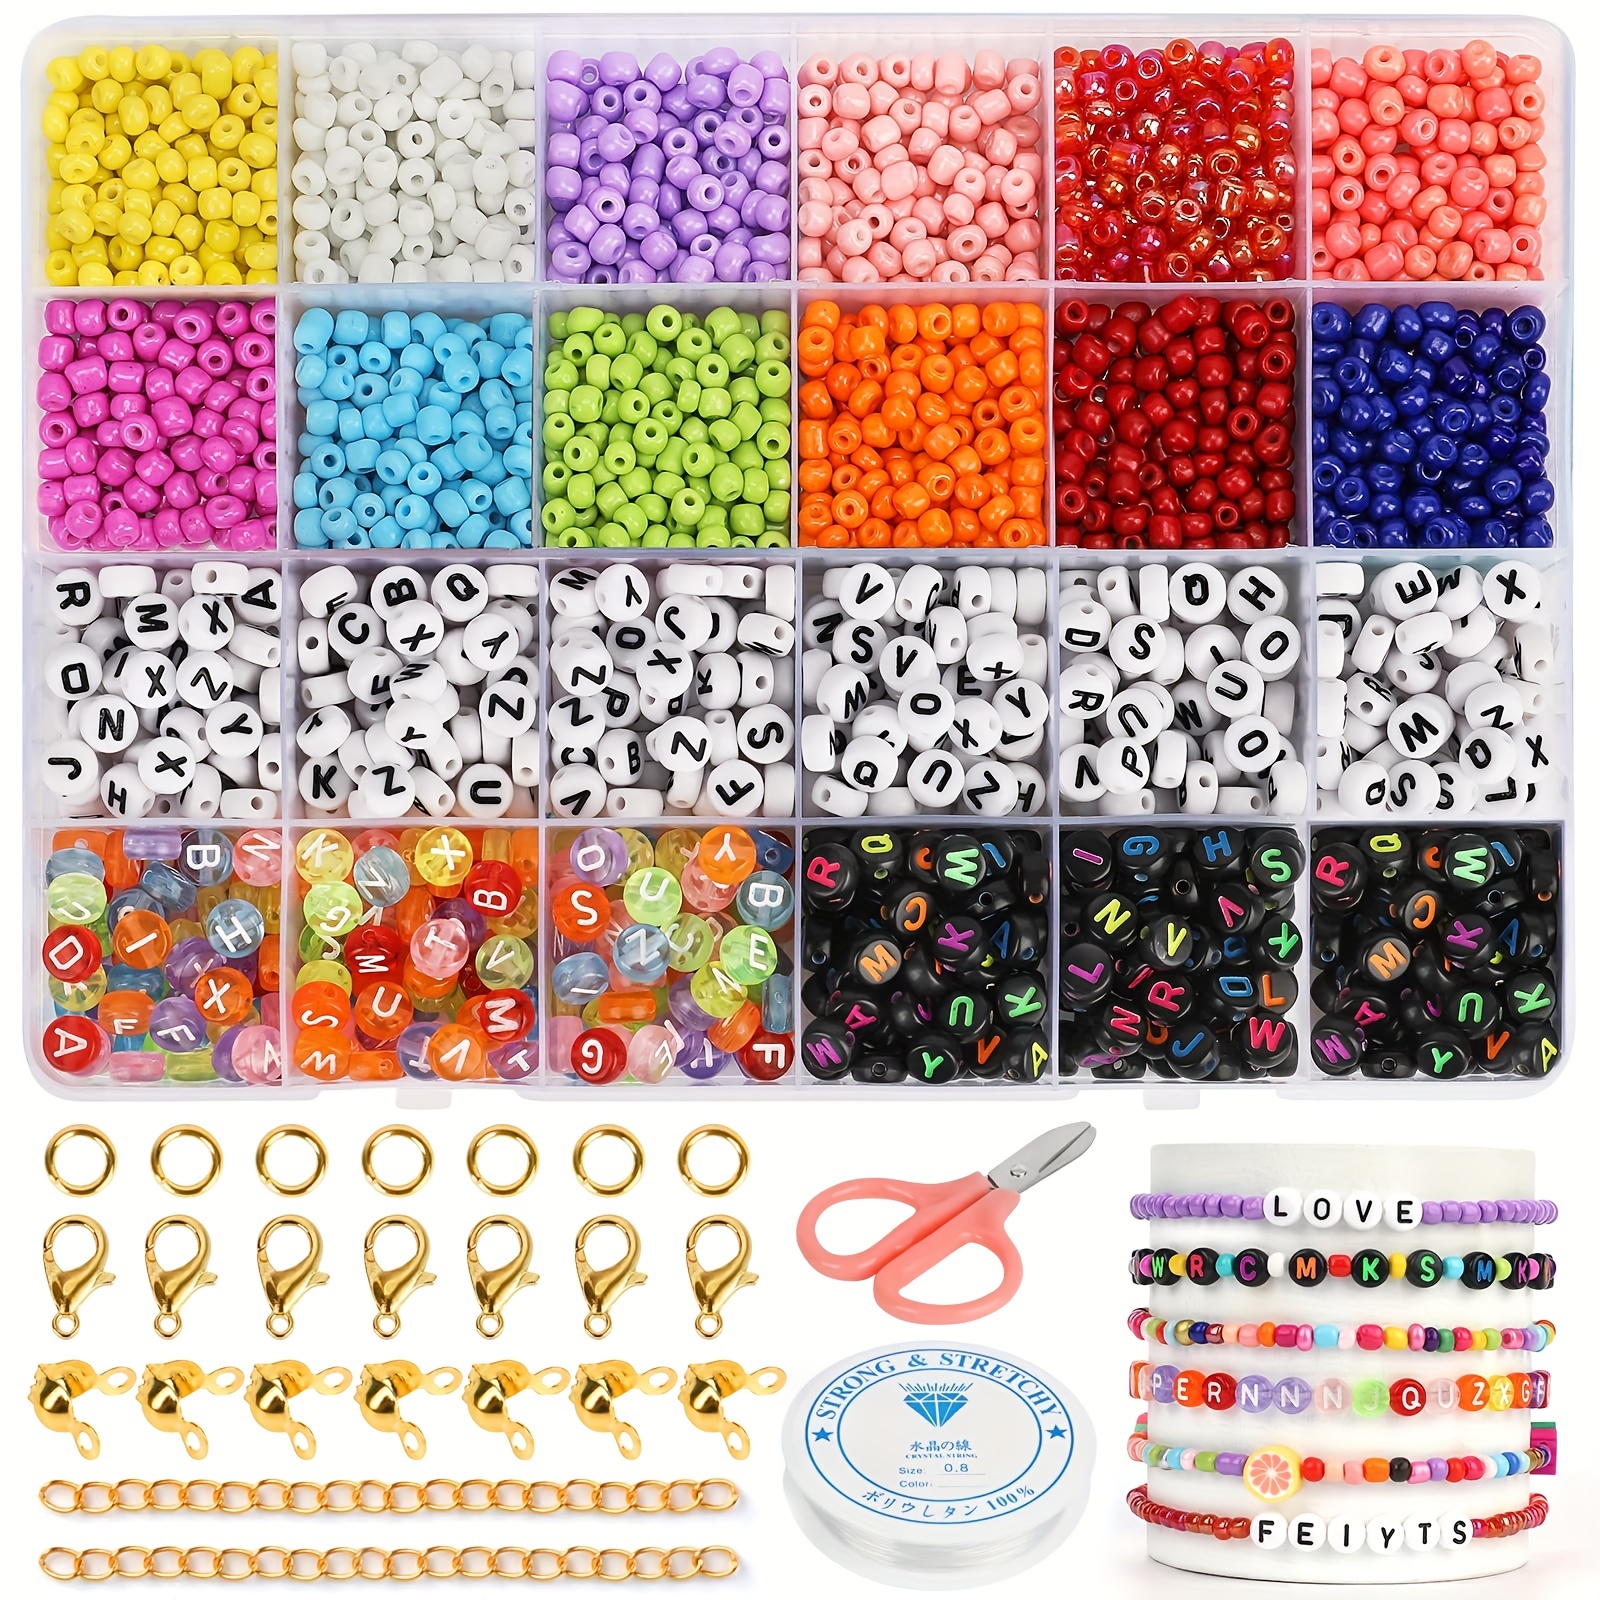 Craft Beads Kit 10800pcs 3mm Glass Seed Beads And 1200pcs Letter Beads For  Friendship Bracelets Jewelry Making Necklaces And Key Chains With 2 Rolls O